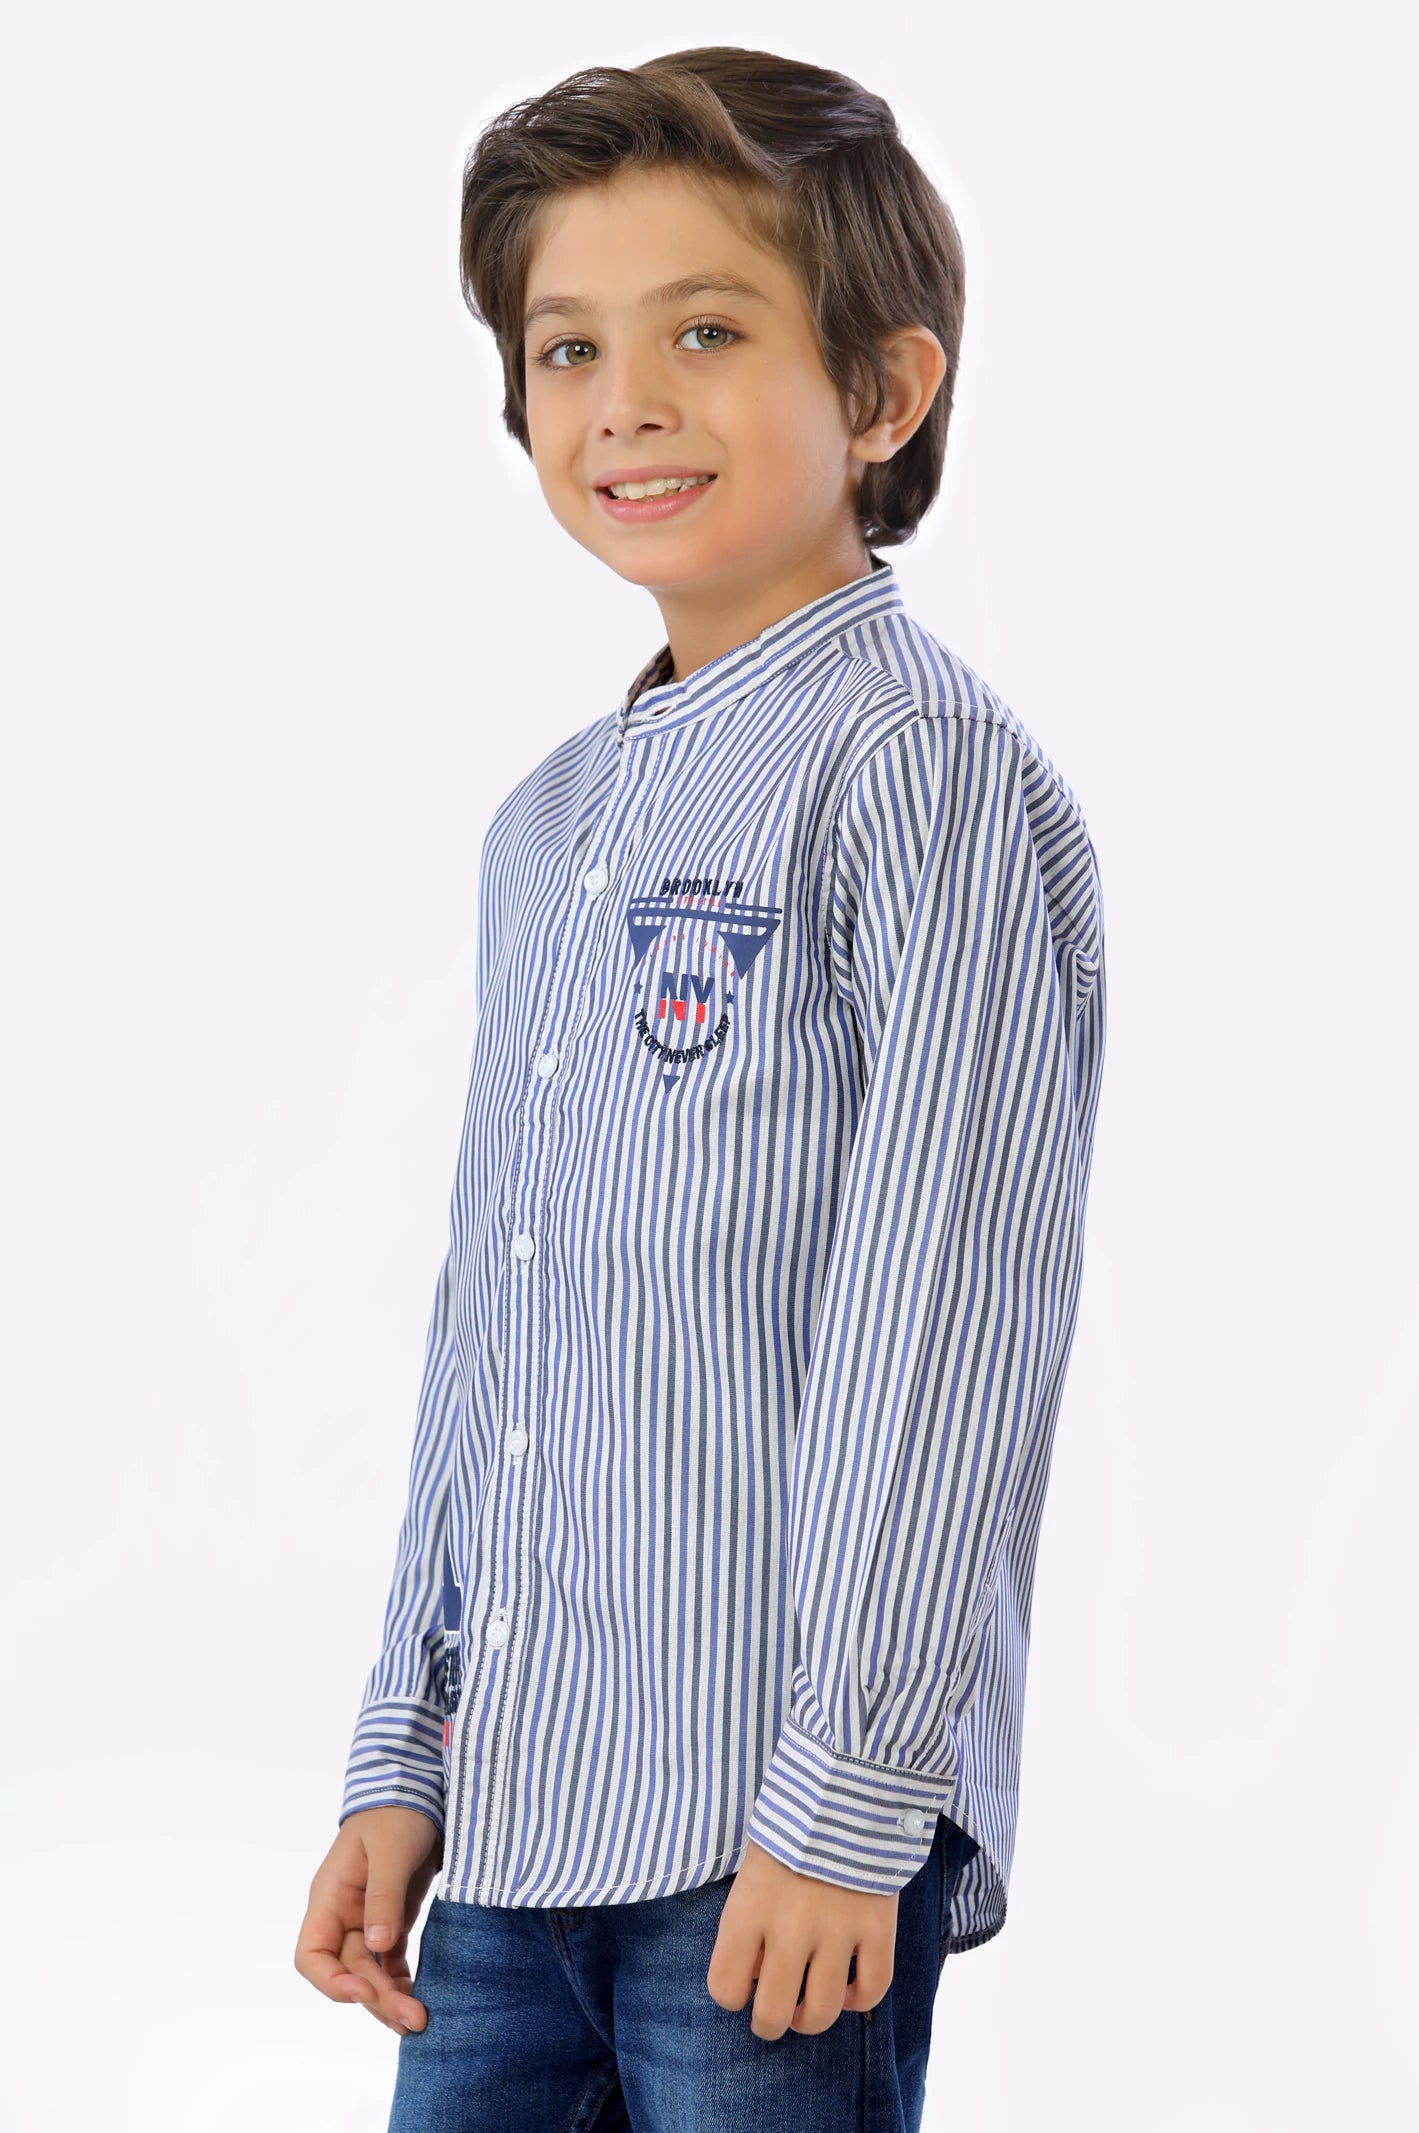 Blue Bengal Stripes Boys Shirt From Diners